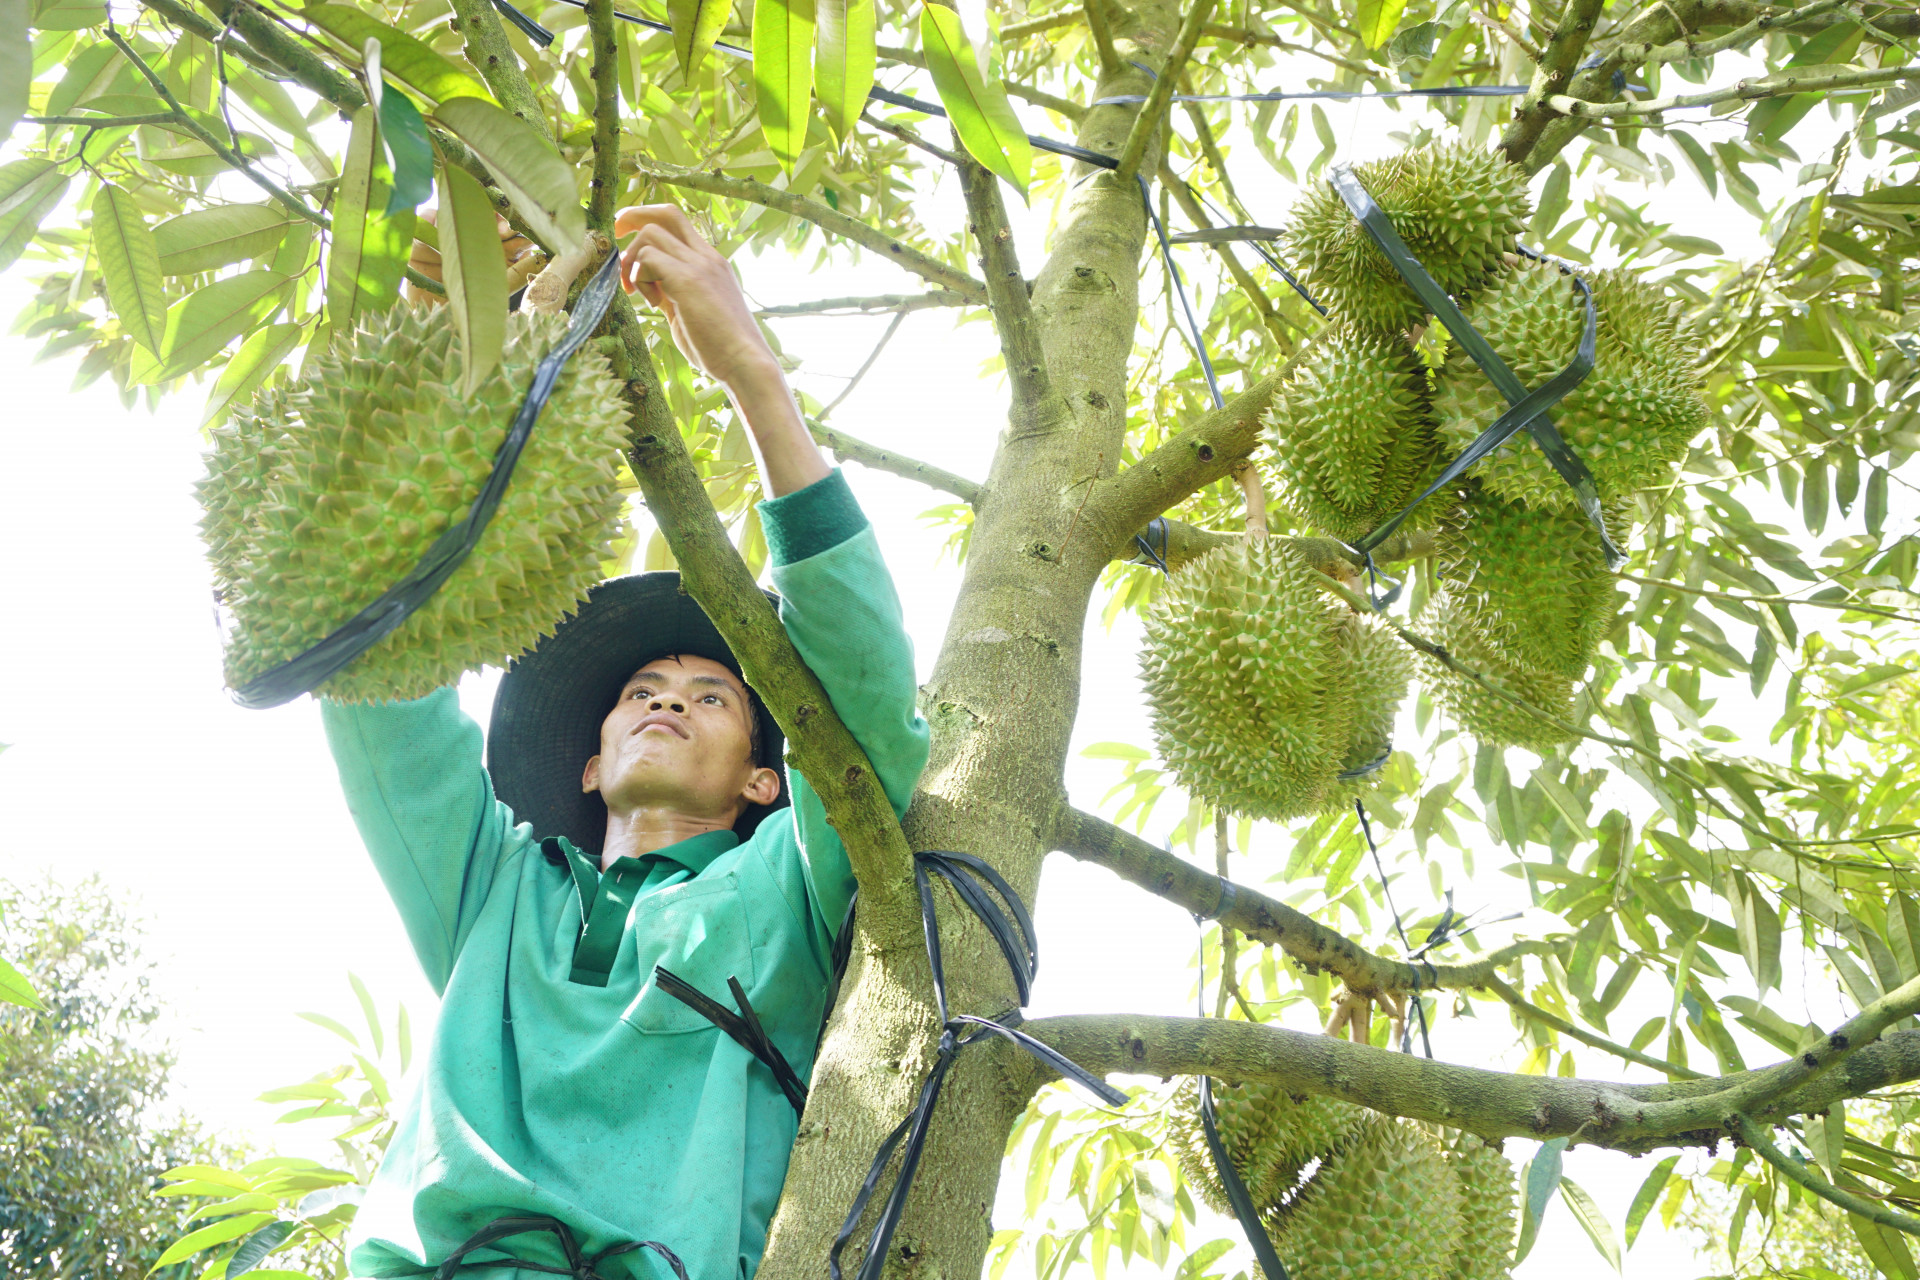 Khanh Son: Increasing value of agricultural products